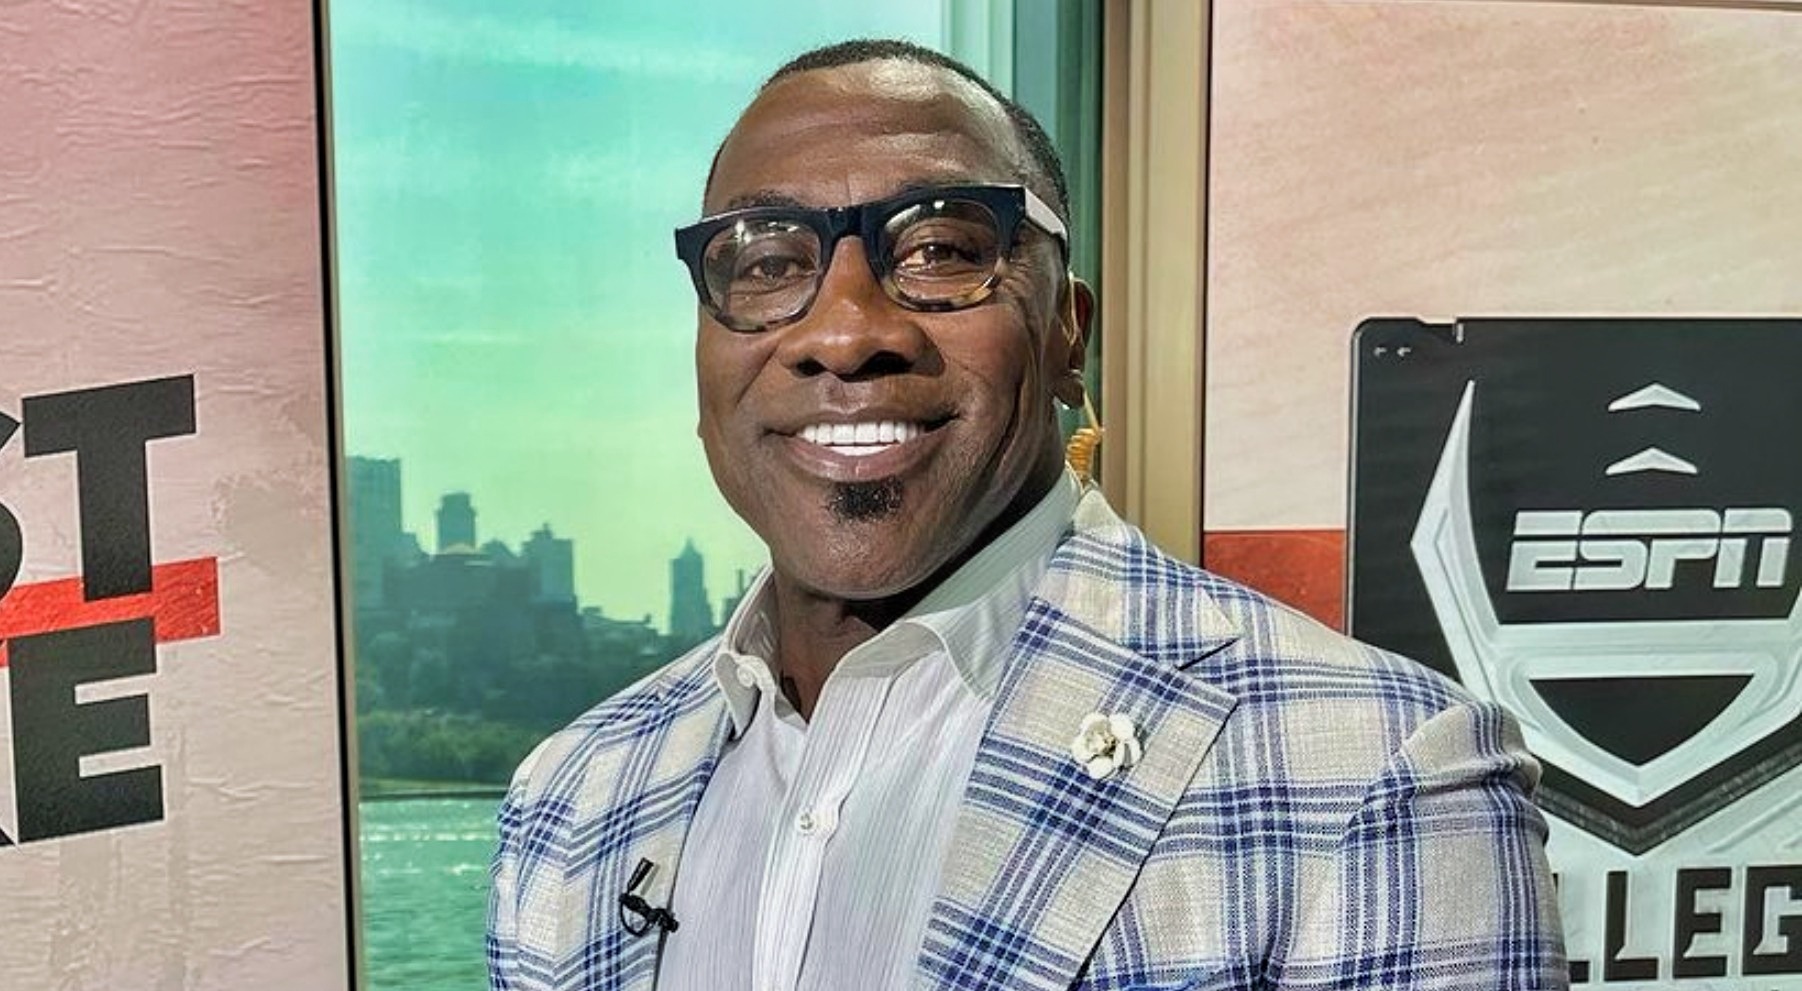 Social Media Rosts Shannon Sharpe Over The Heavy Makeup